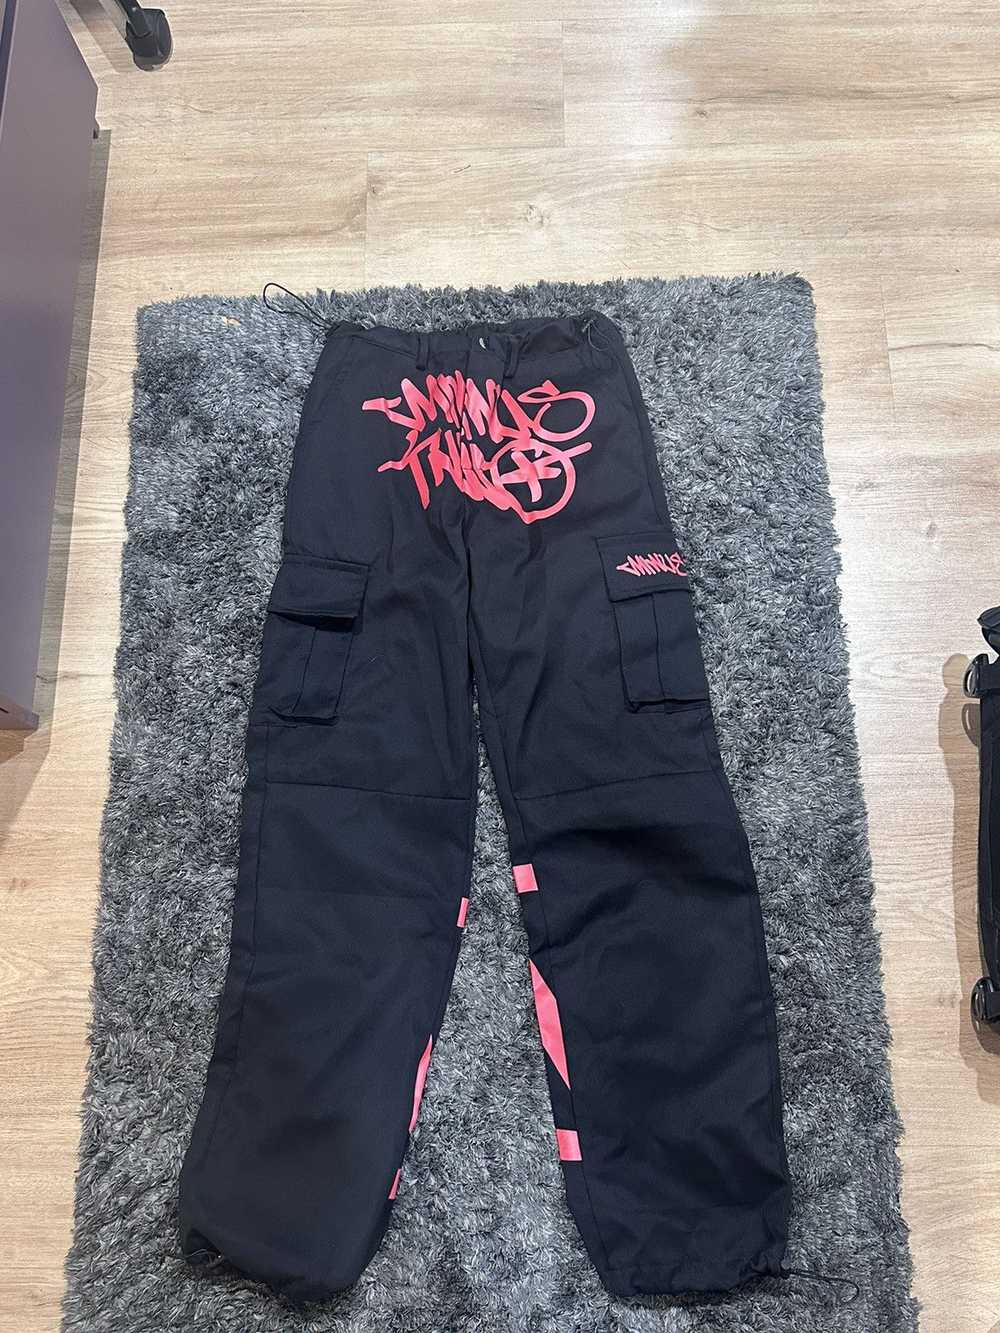 Japanese Brand Minus Two cargos, black and red - image 1